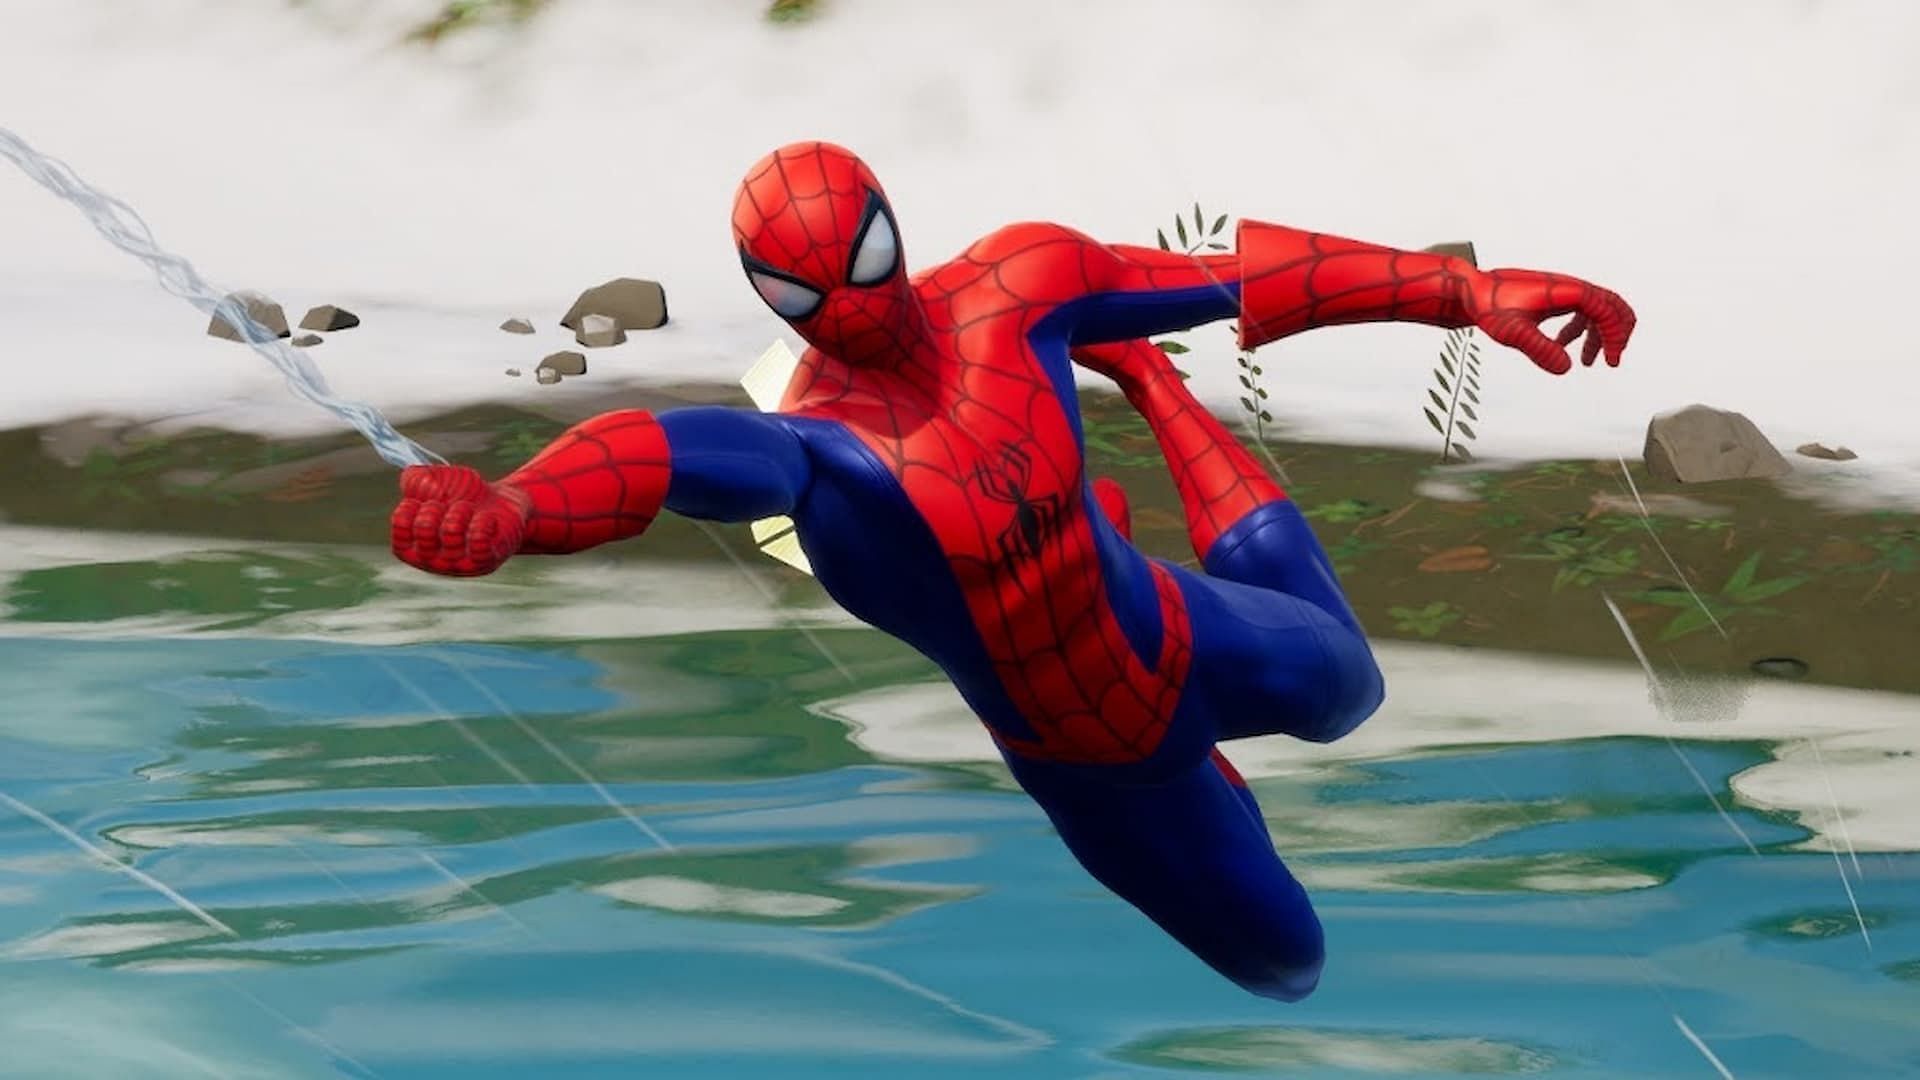 The Spider-Man Web Shooters allow for easy travel across the island (Image via Epic Games)